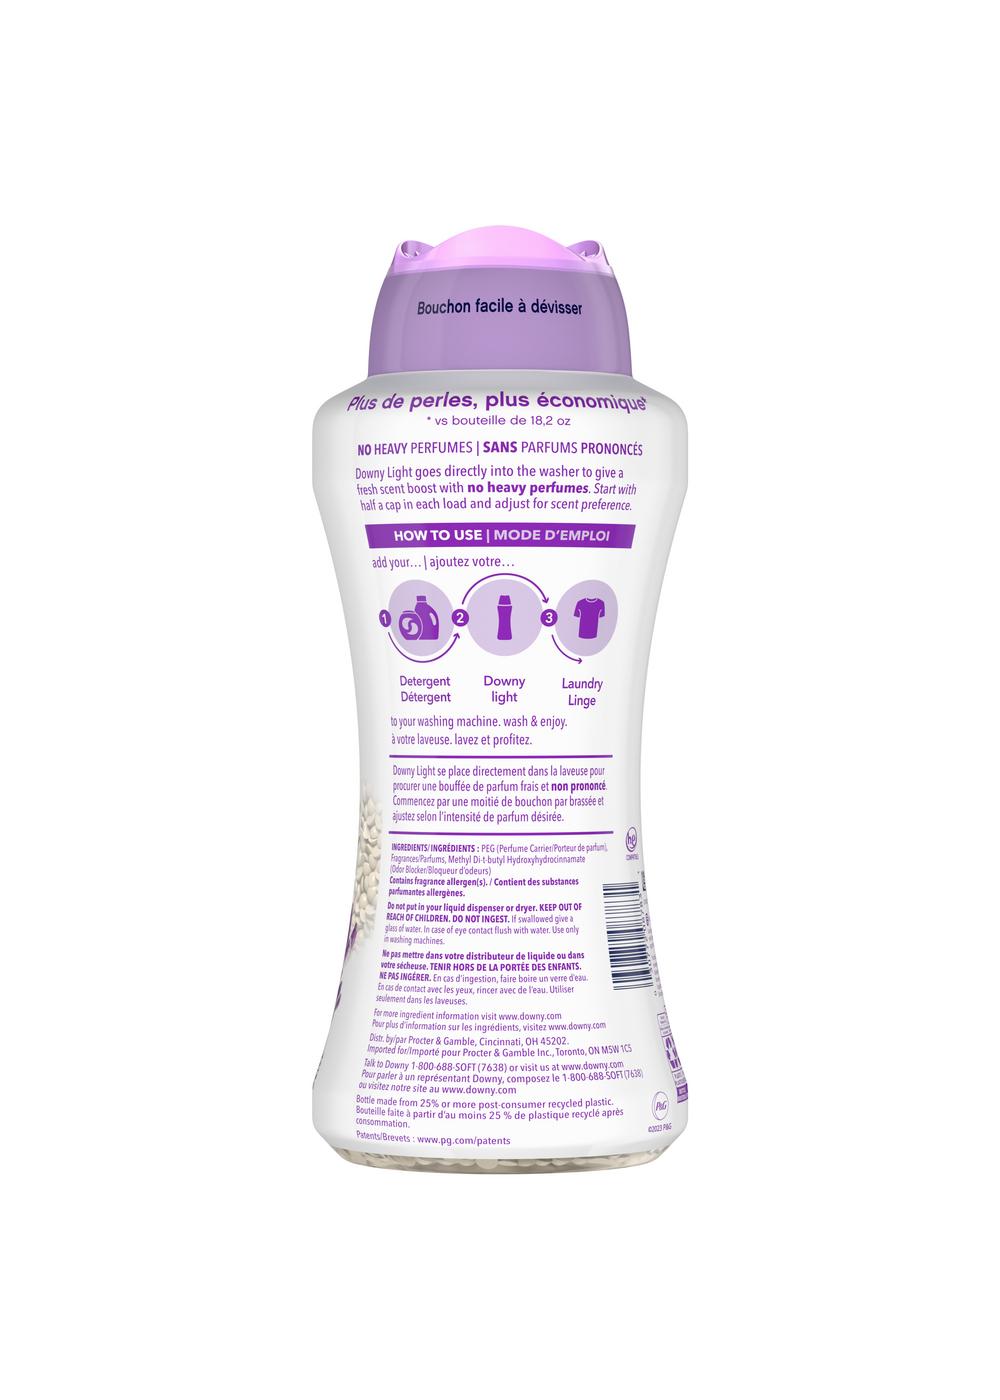 Downy Light In-Wash Scent Booster - White Lavender; image 5 of 9